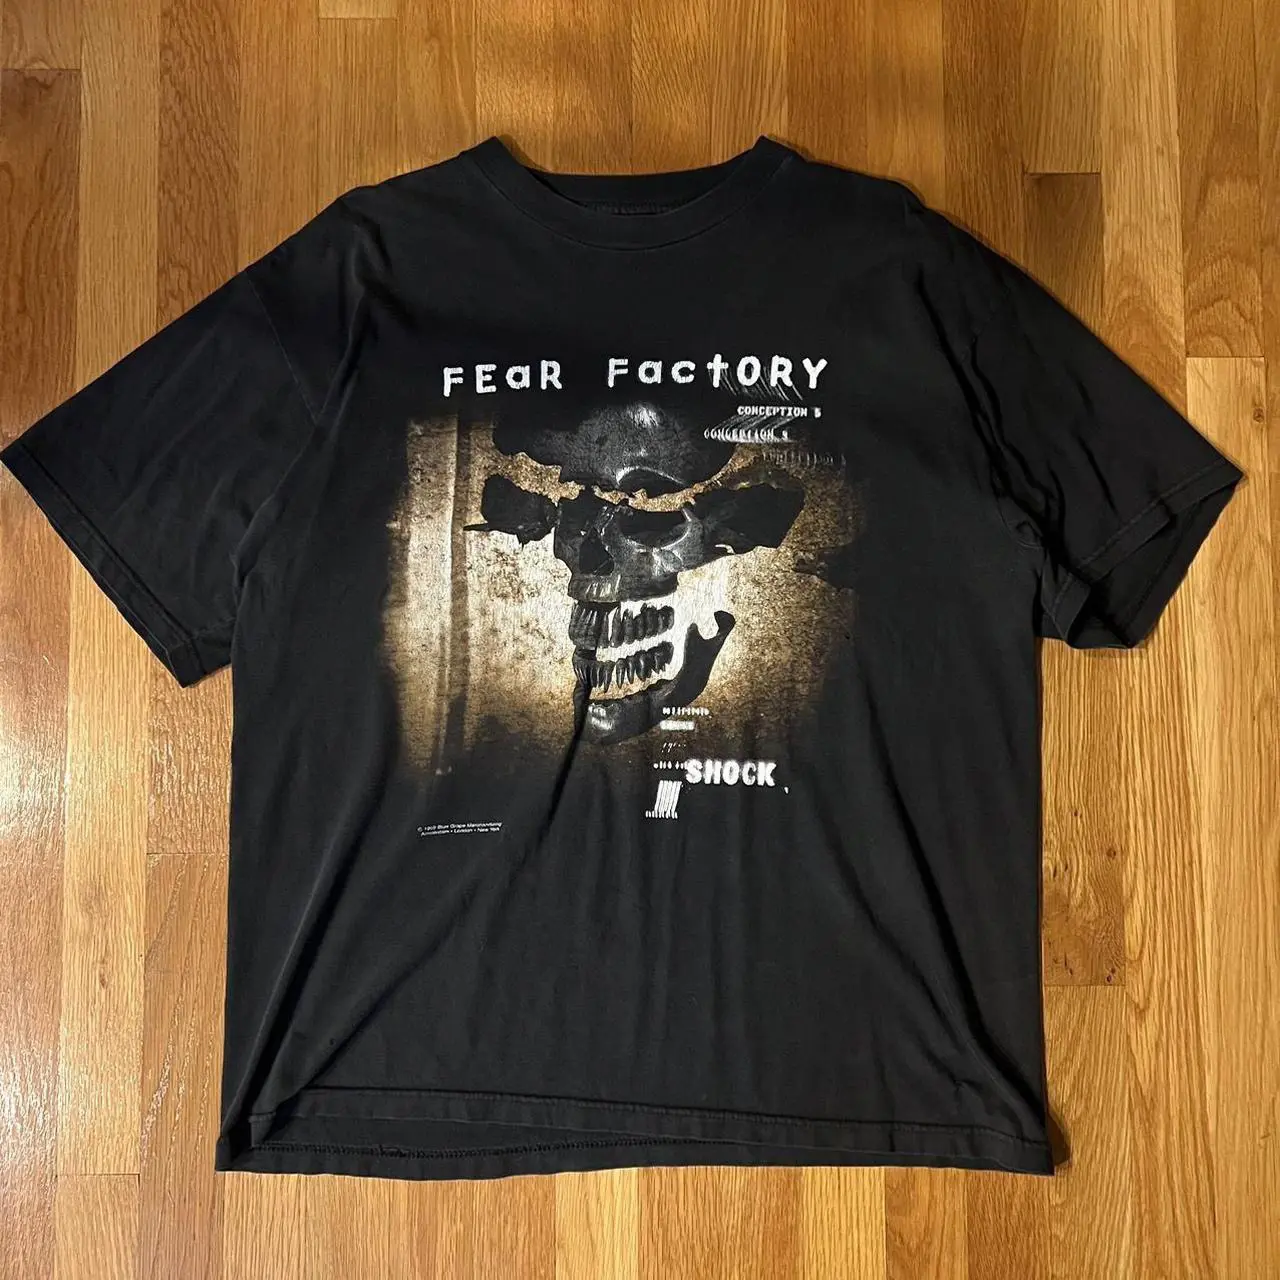 Vintage 1999 Fear Factory Band Tee (XL)